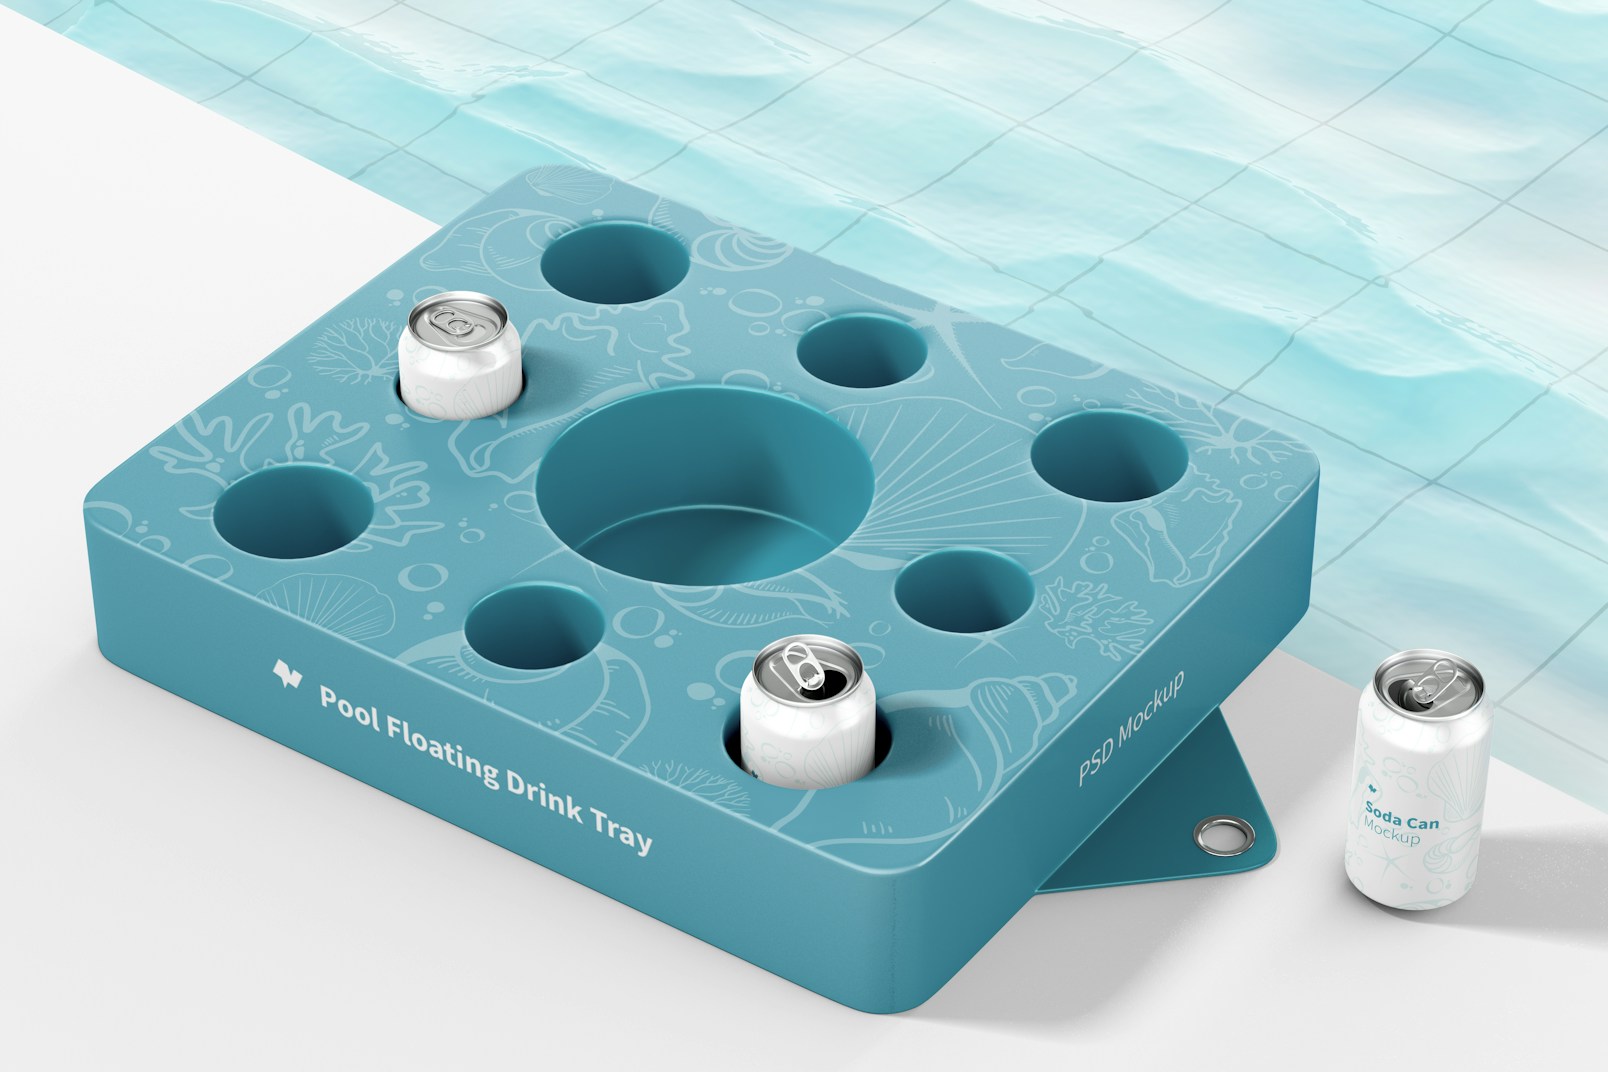 Pool Floating Drink Tray Mockup with Tin Cans Drinks